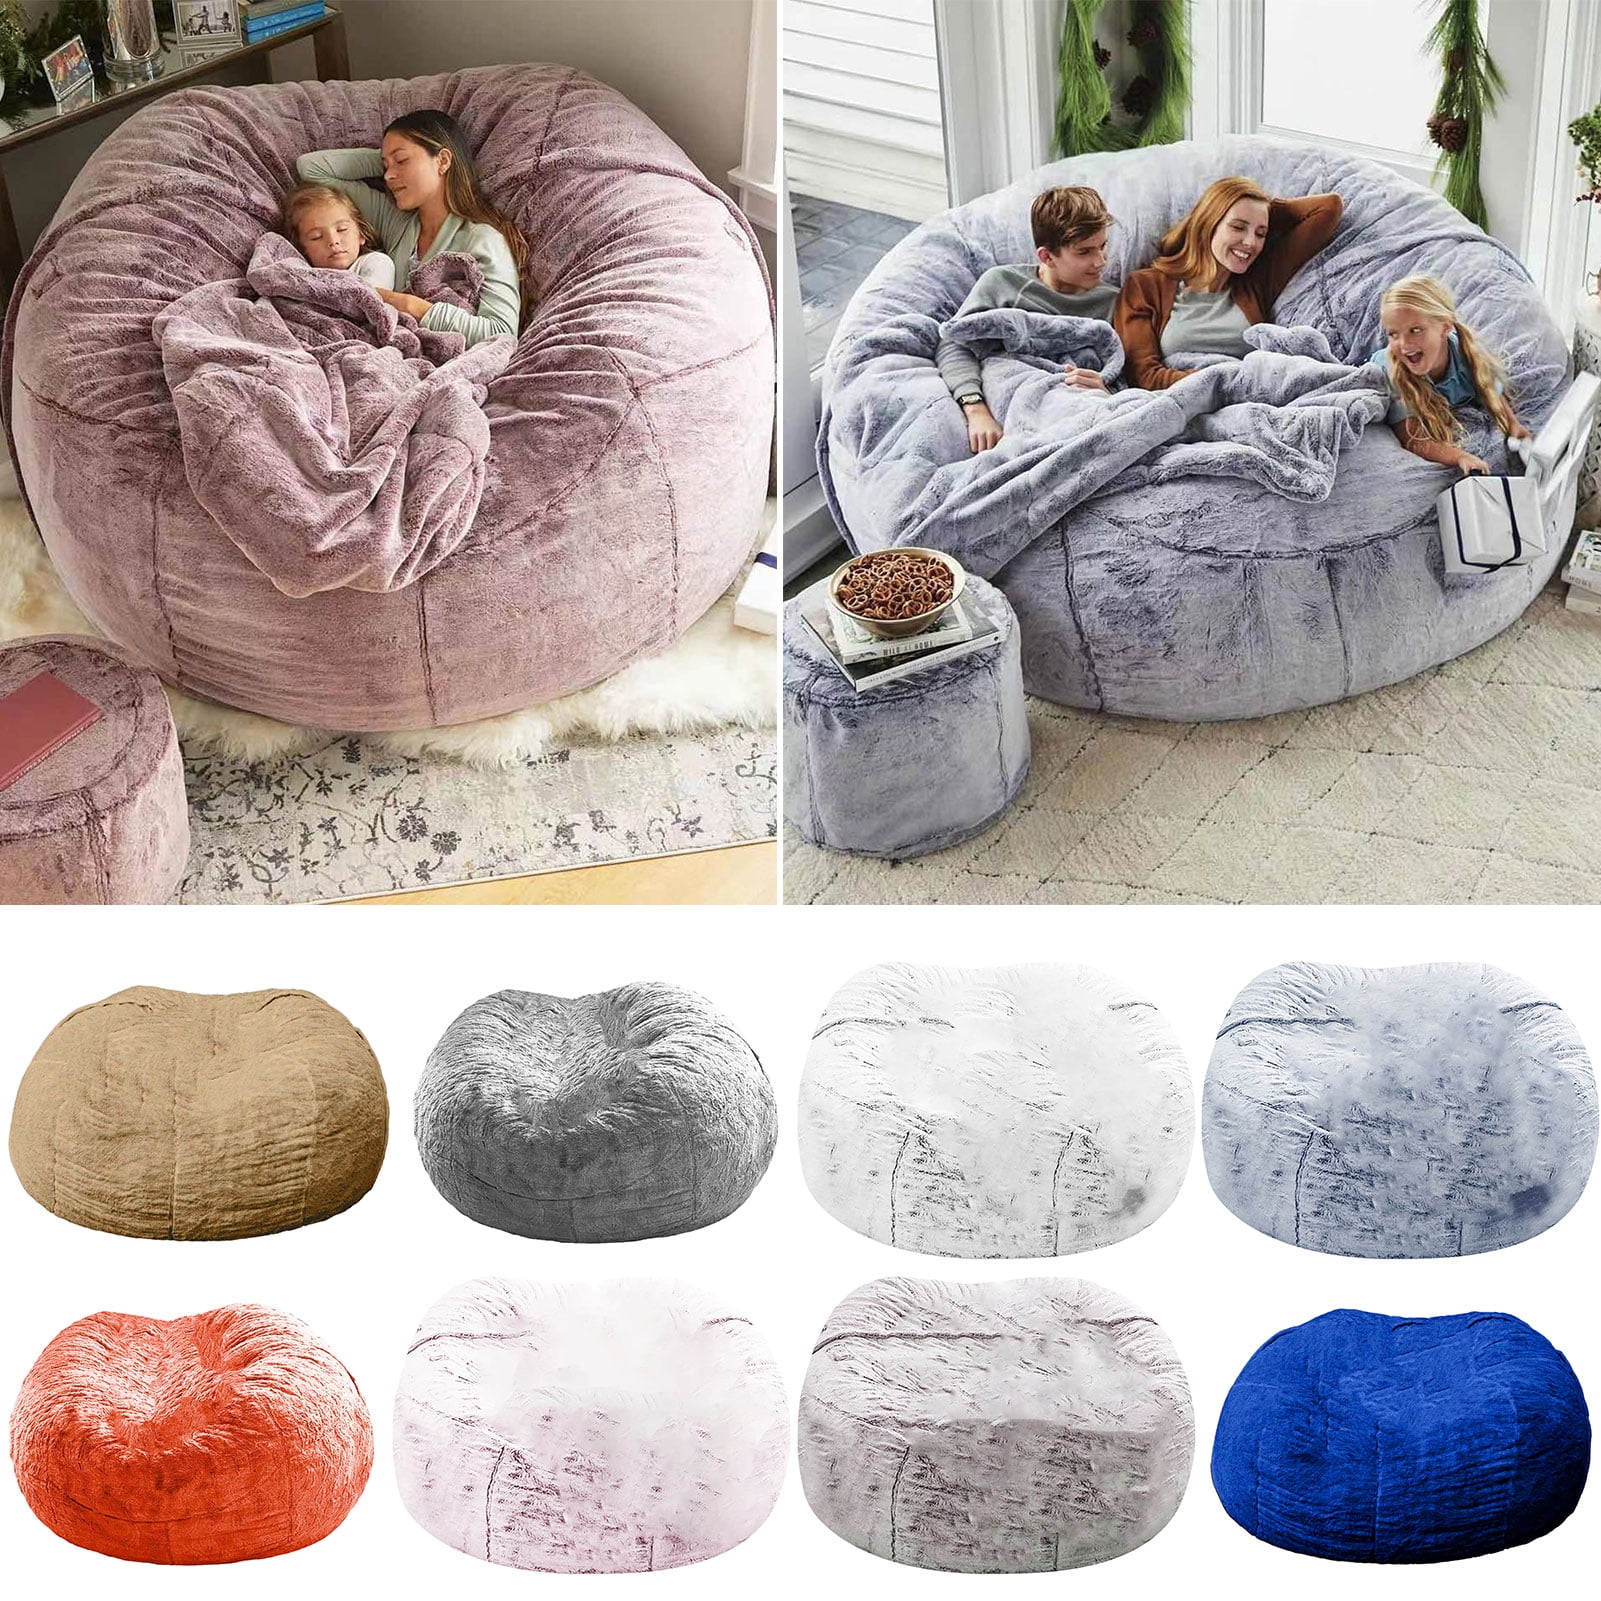 7FT Giant Bean Bag Chair Round Soft Fluffy Faux Fur BeanBag Lazy Sofa Bed  Cover | eBay